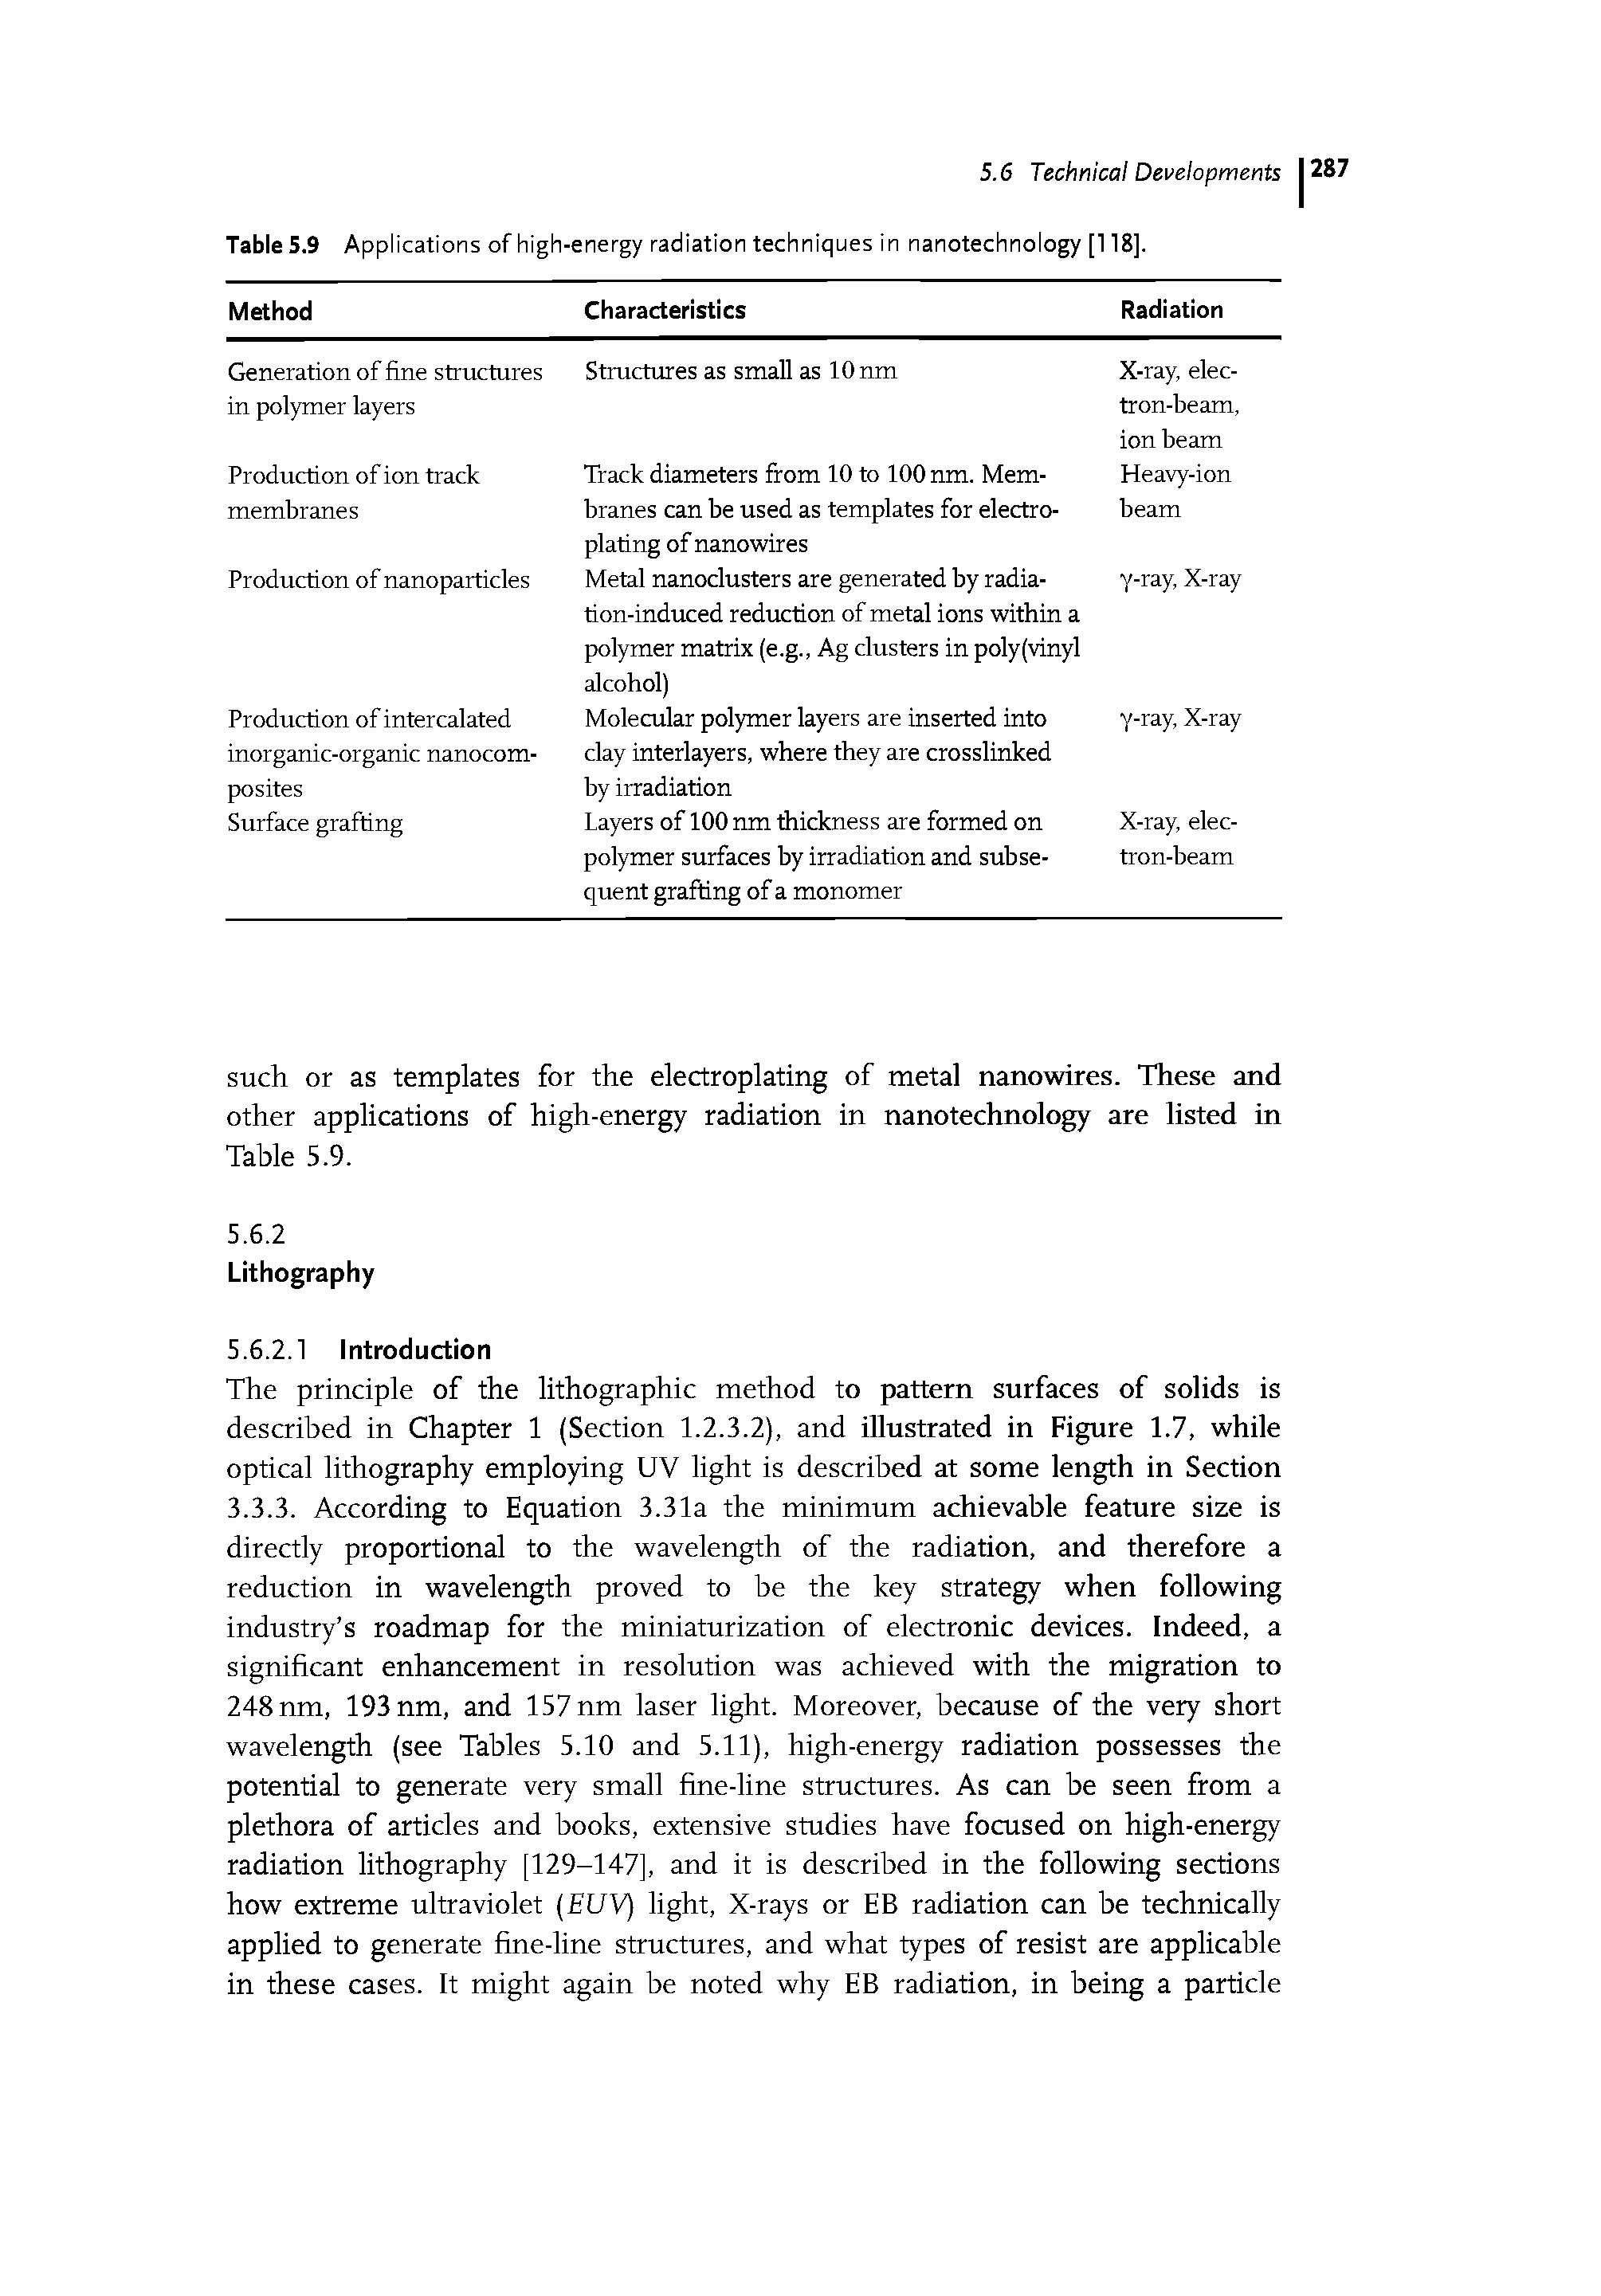 Table S.9 Applications of high-energy radiation techniques in nanotechnology [118].